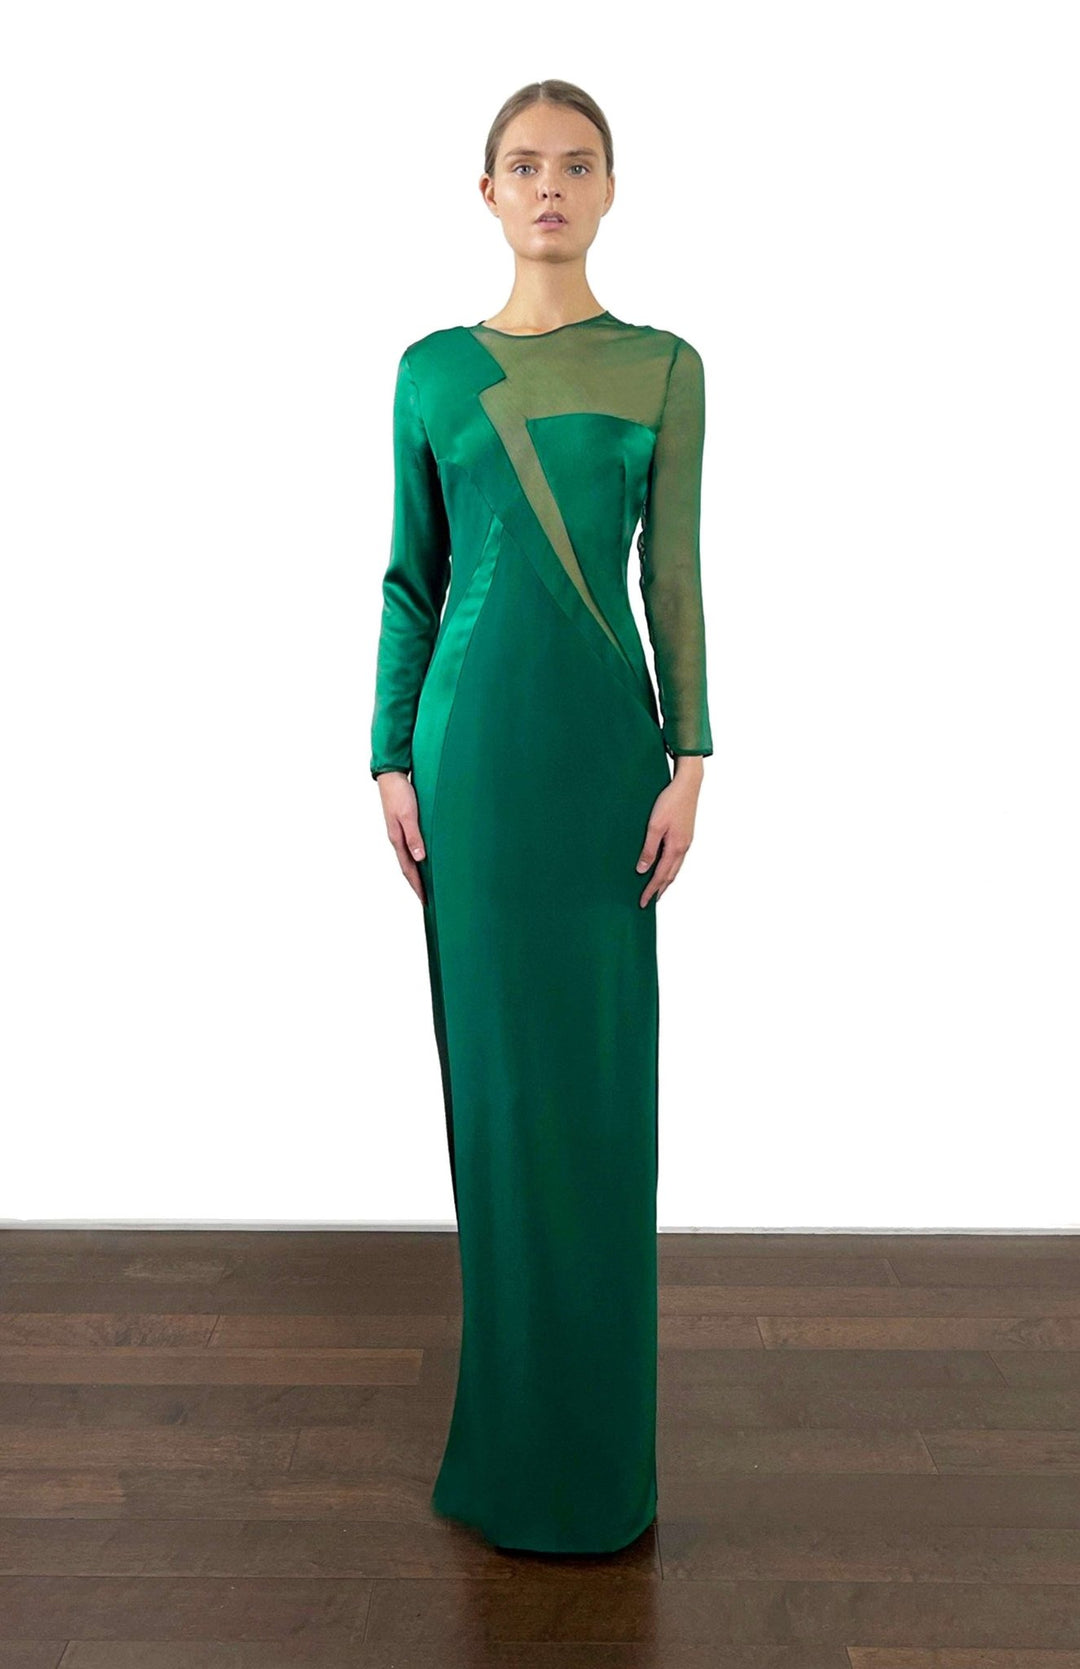 Emerald green silk satin gown with sheer panels